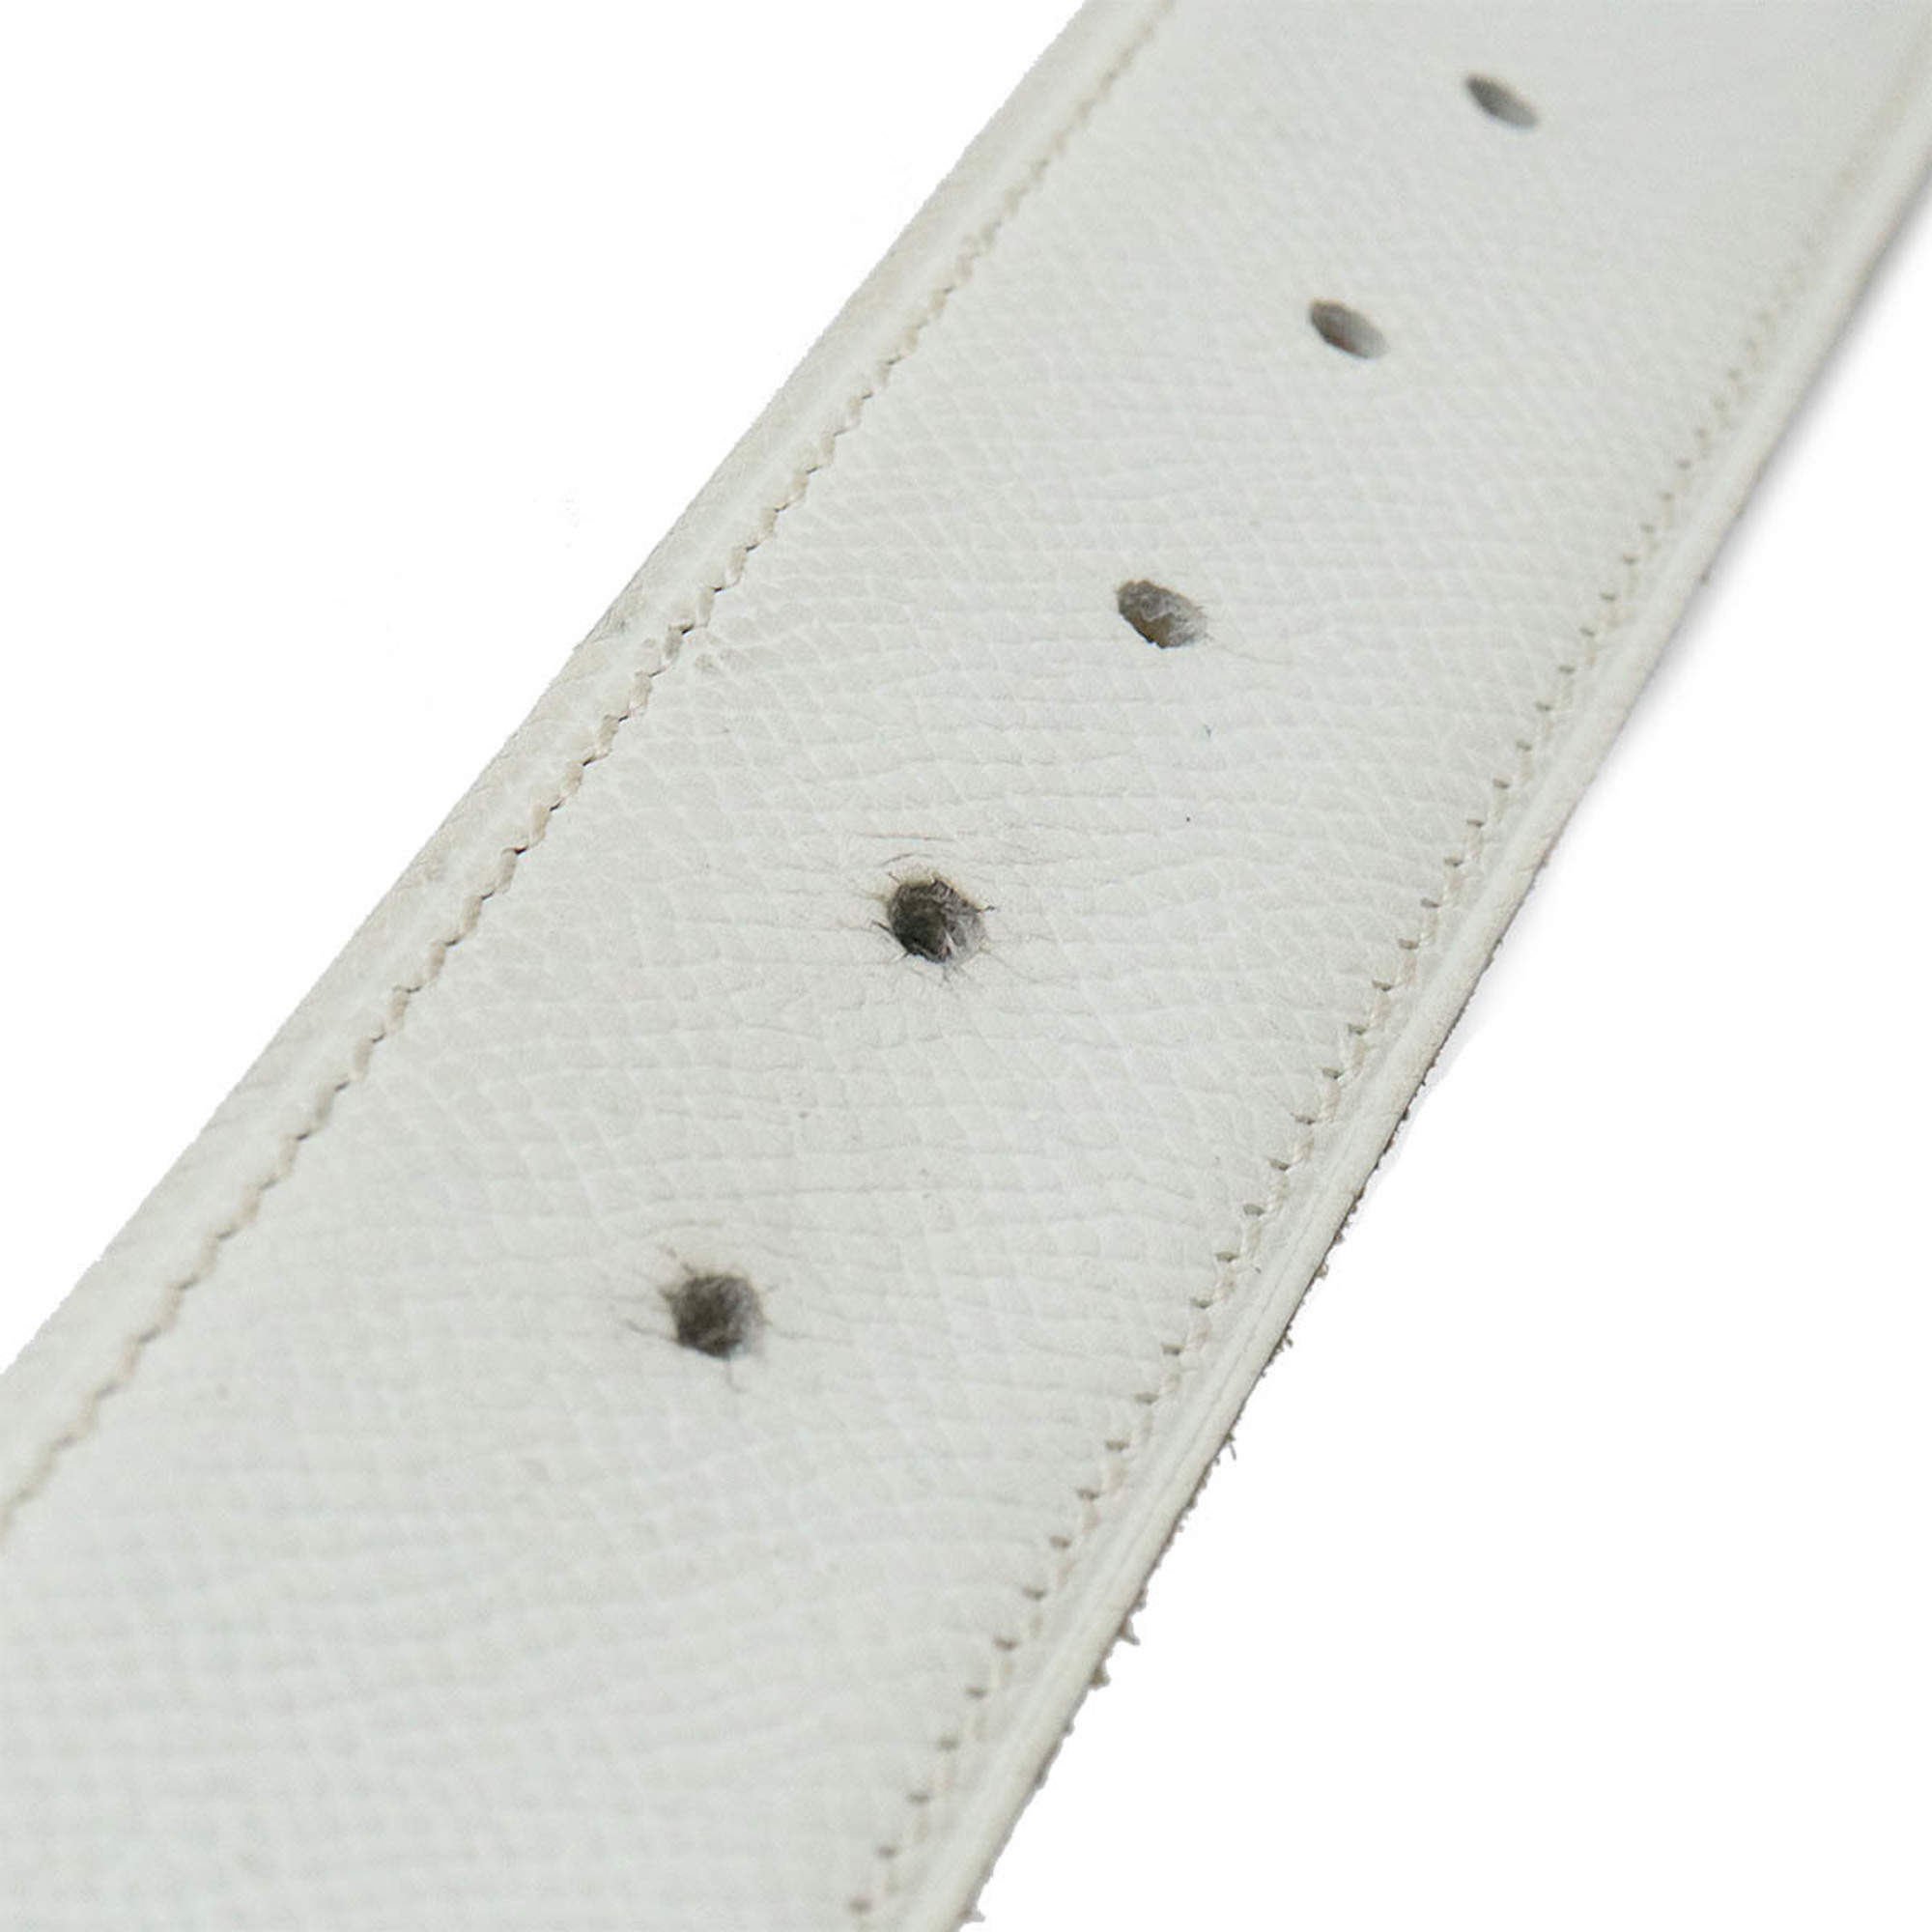 HERMES Constance H Belt, reversible leather, black and white, #90, L engraved